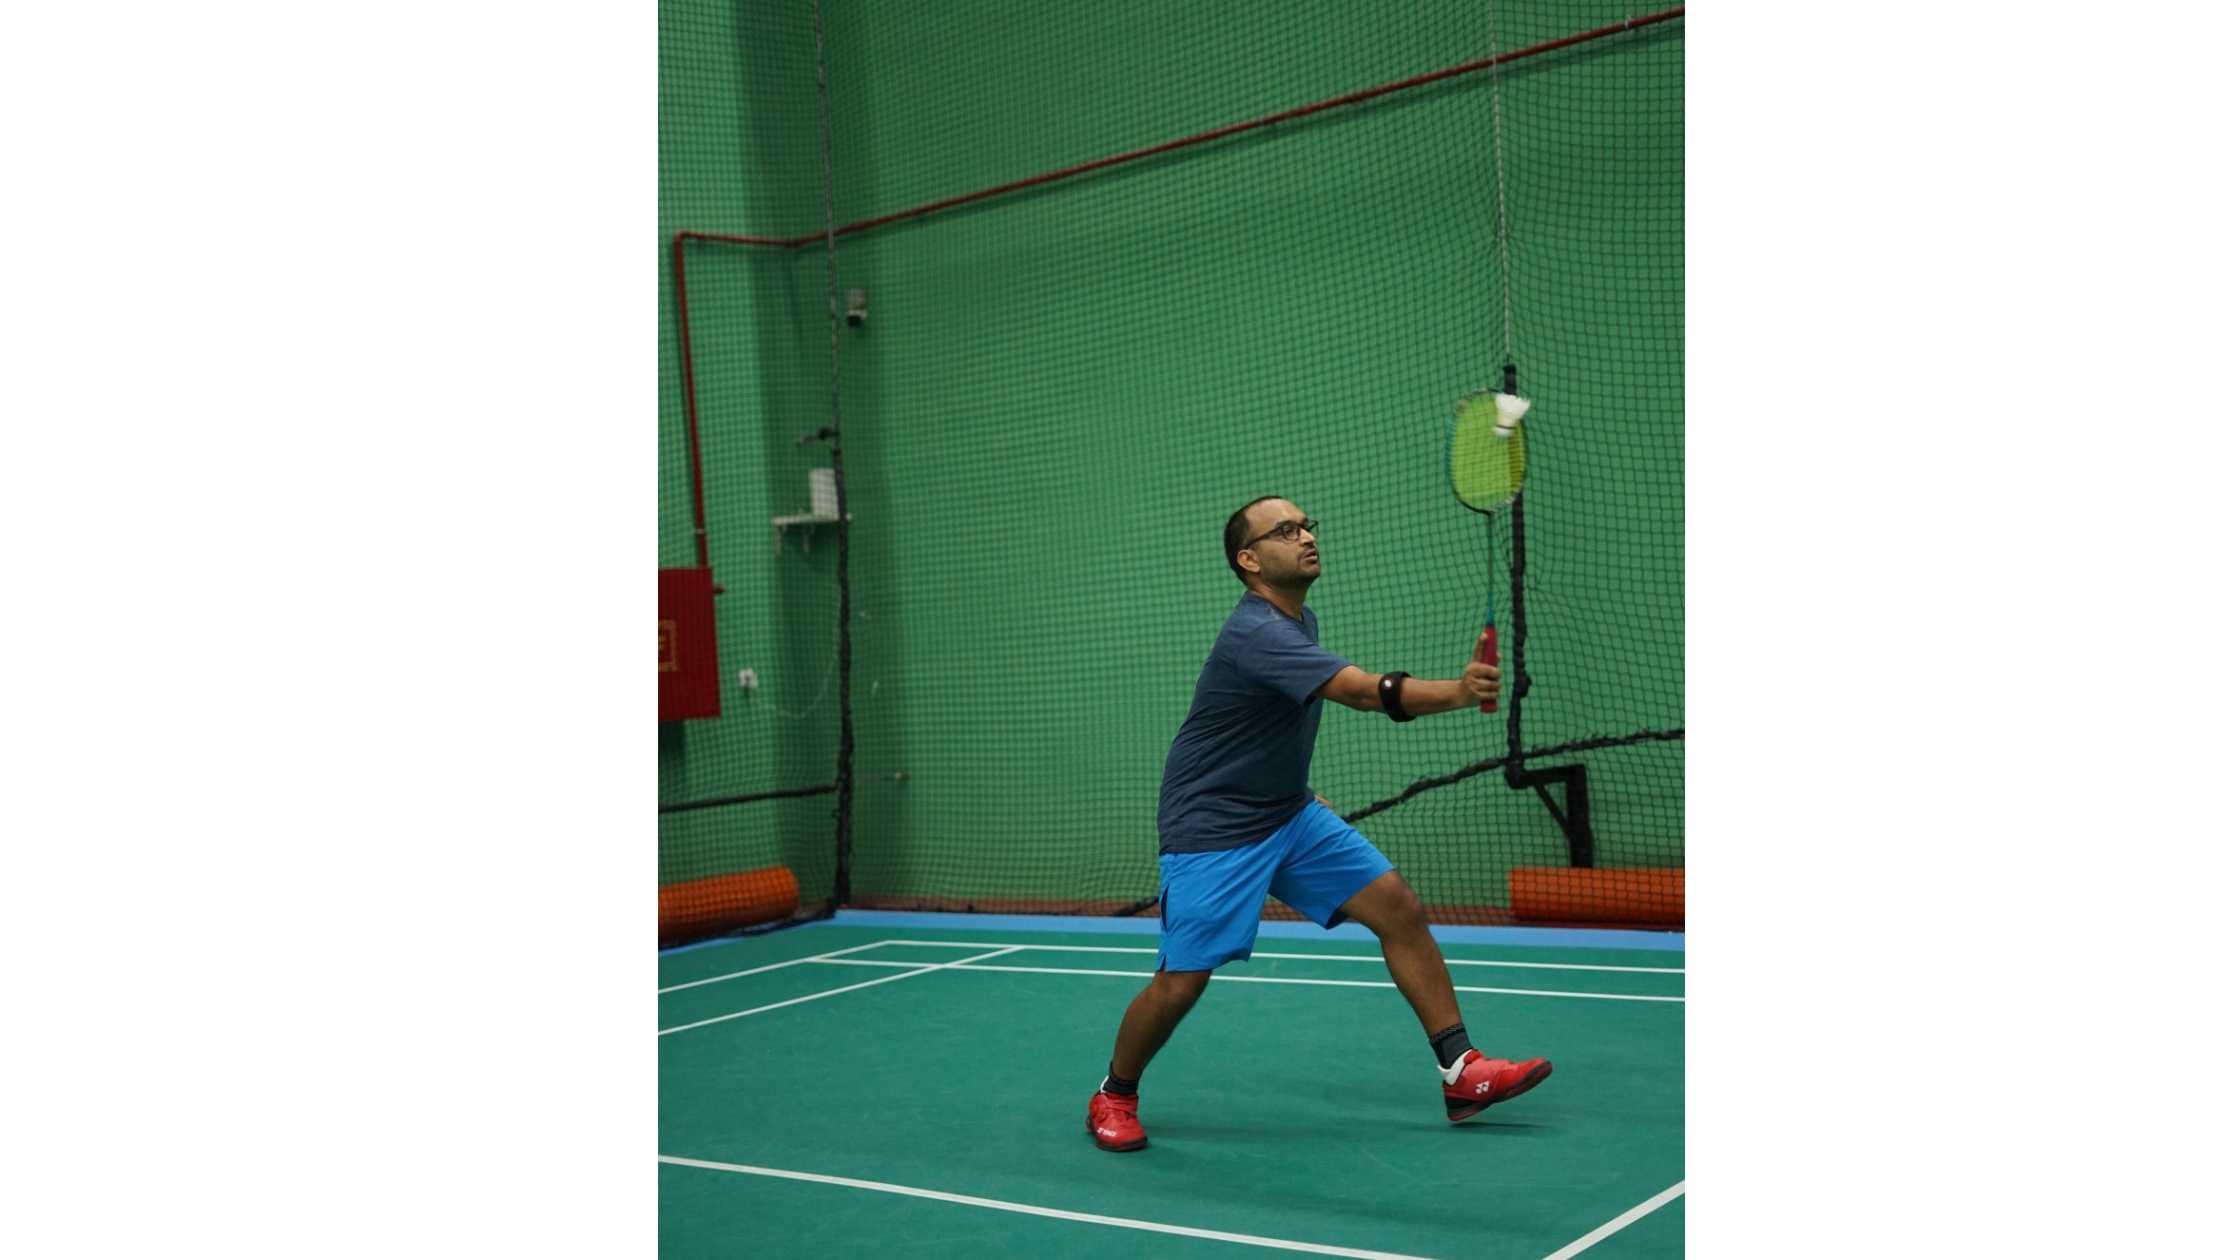 How to Choose a Badminton Coach in Dubai: This could include tips on what to look for when choosing a coach, such as their experience, teaching style, feedback from former students etc.